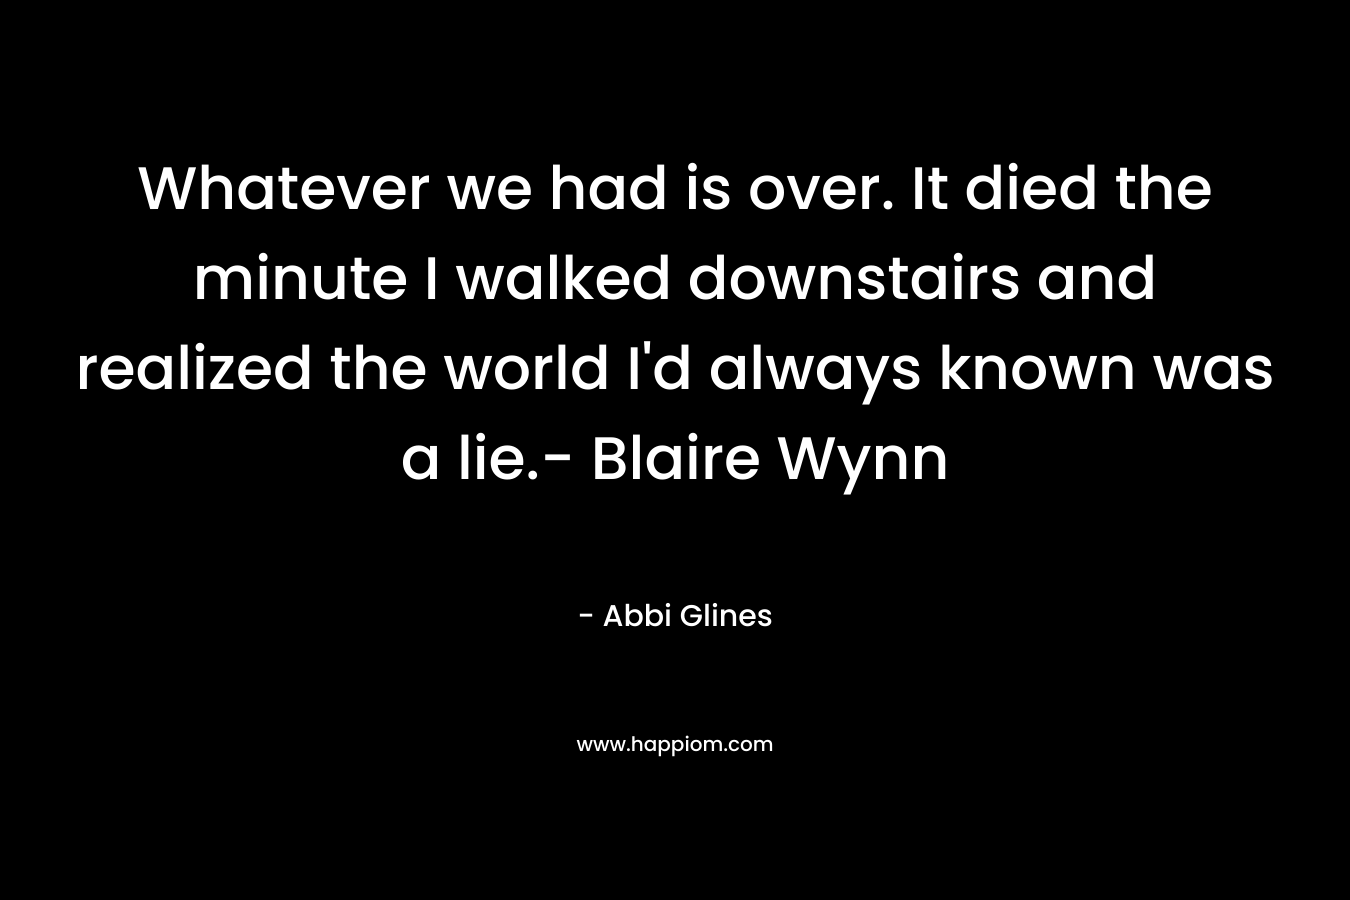 Whatever we had is over. It died the minute I walked downstairs and realized the world I'd always known was a lie.- Blaire Wynn